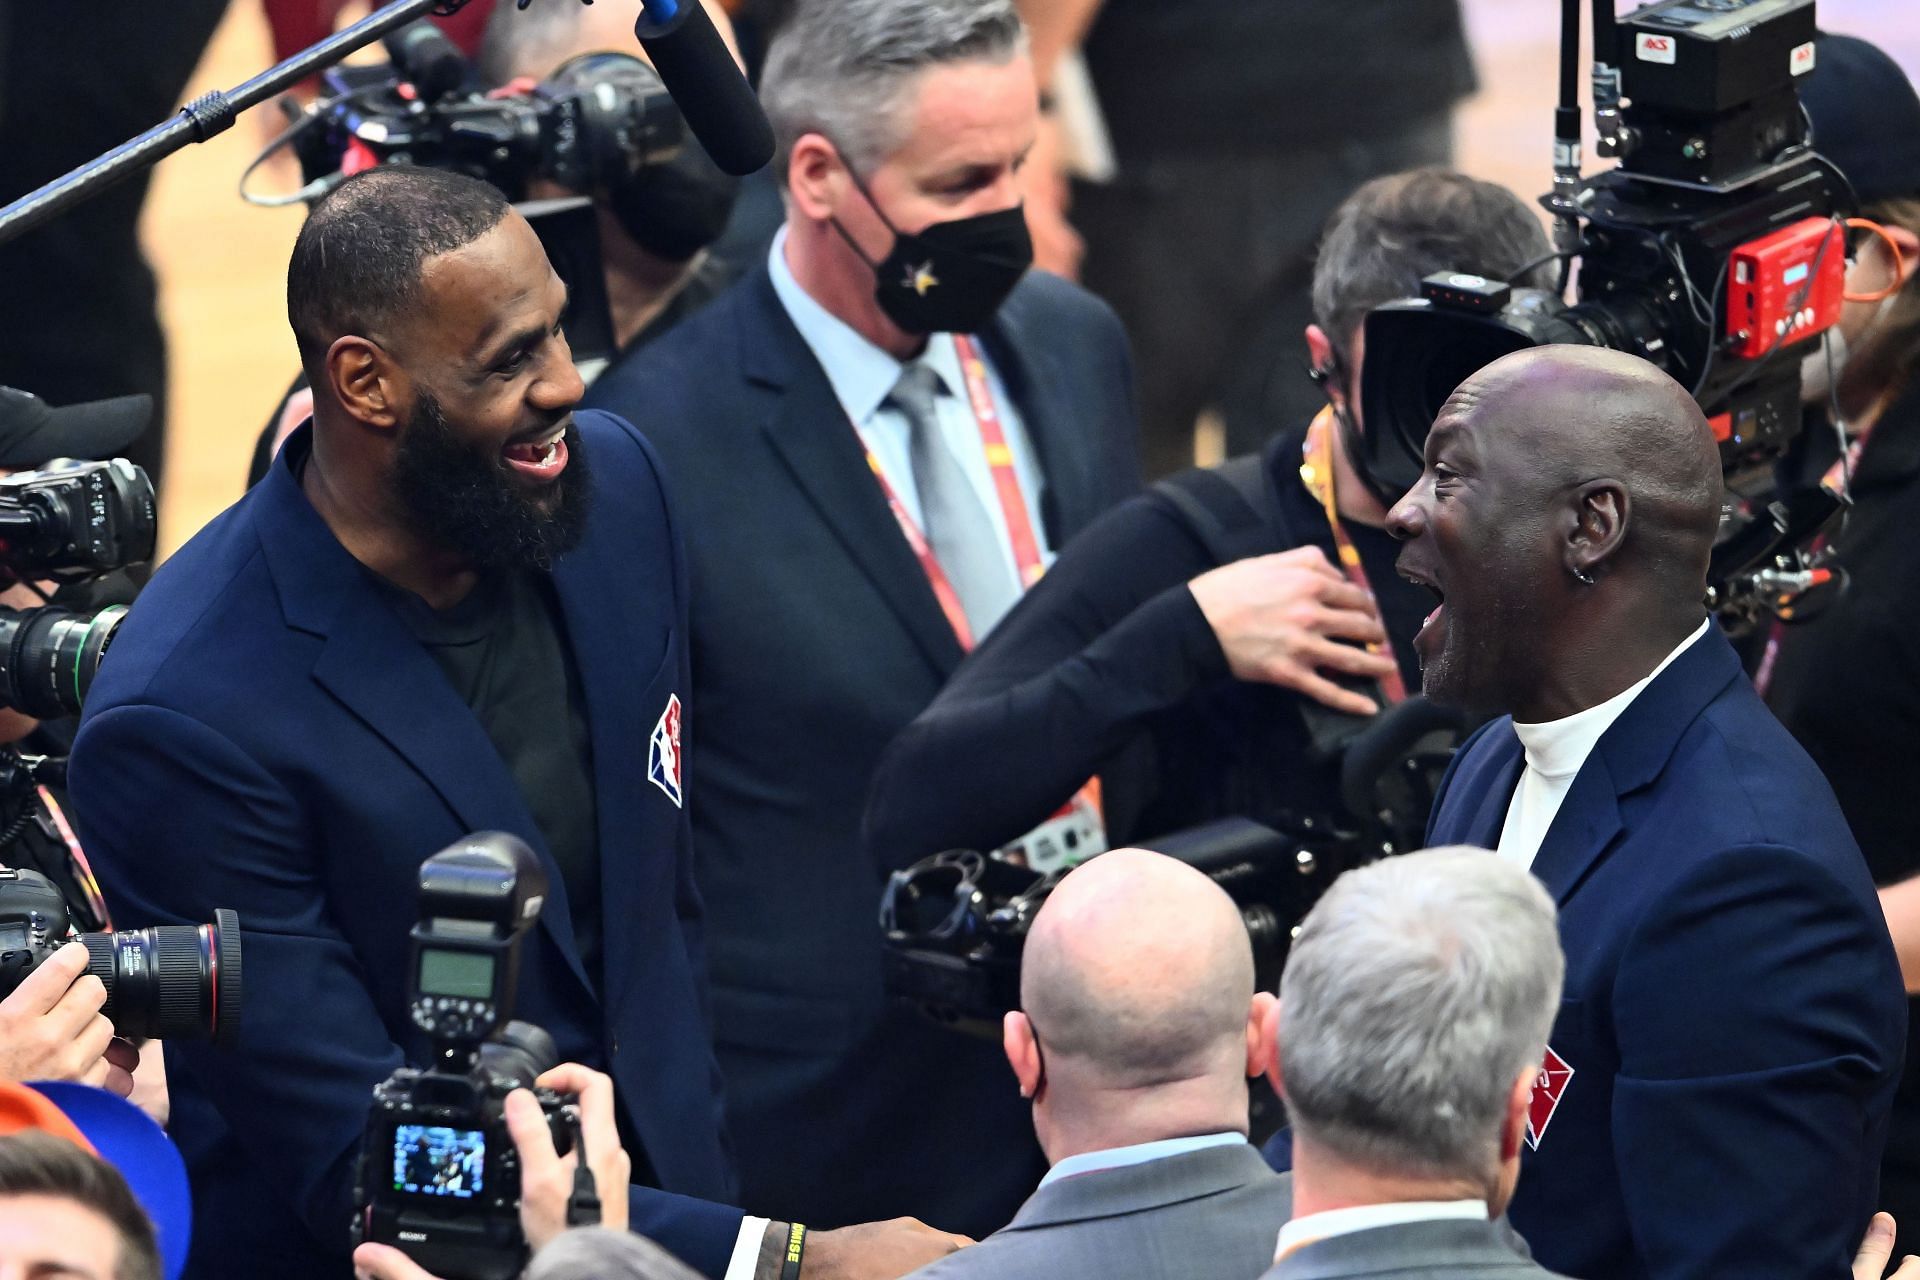 LeBron James and Michael Jordan visit during the All-Star weekend